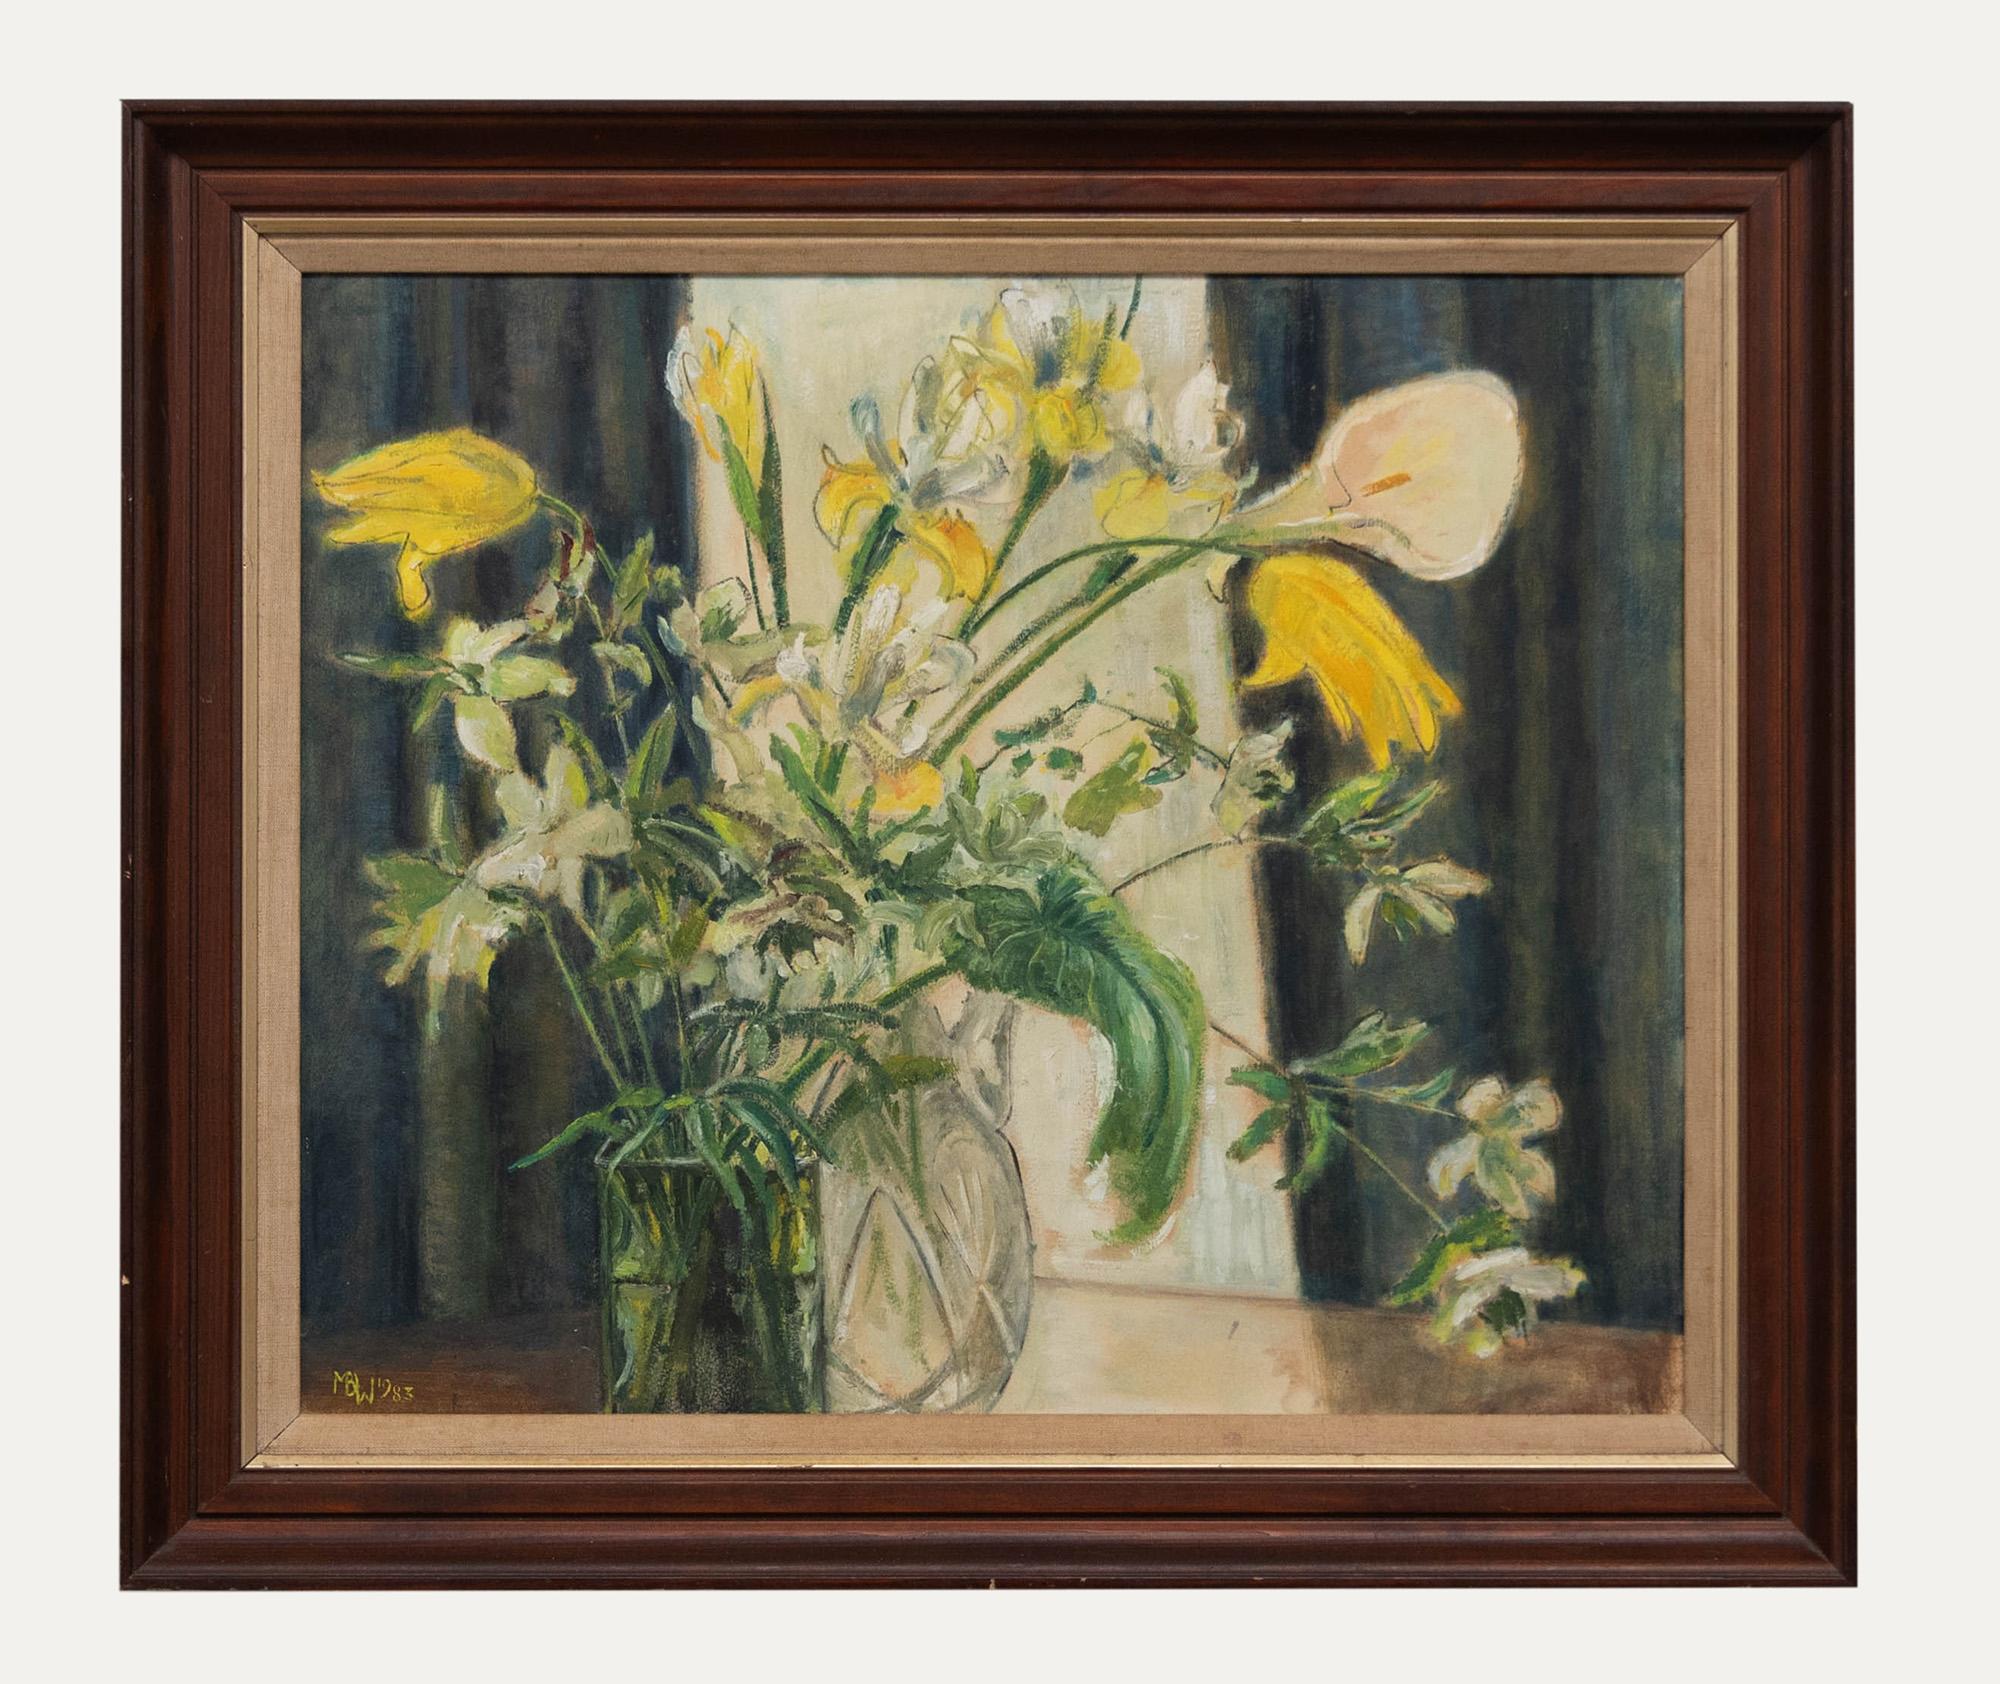 Still-Life Painting Unknown - 1983 Huile - Lys et tulipes